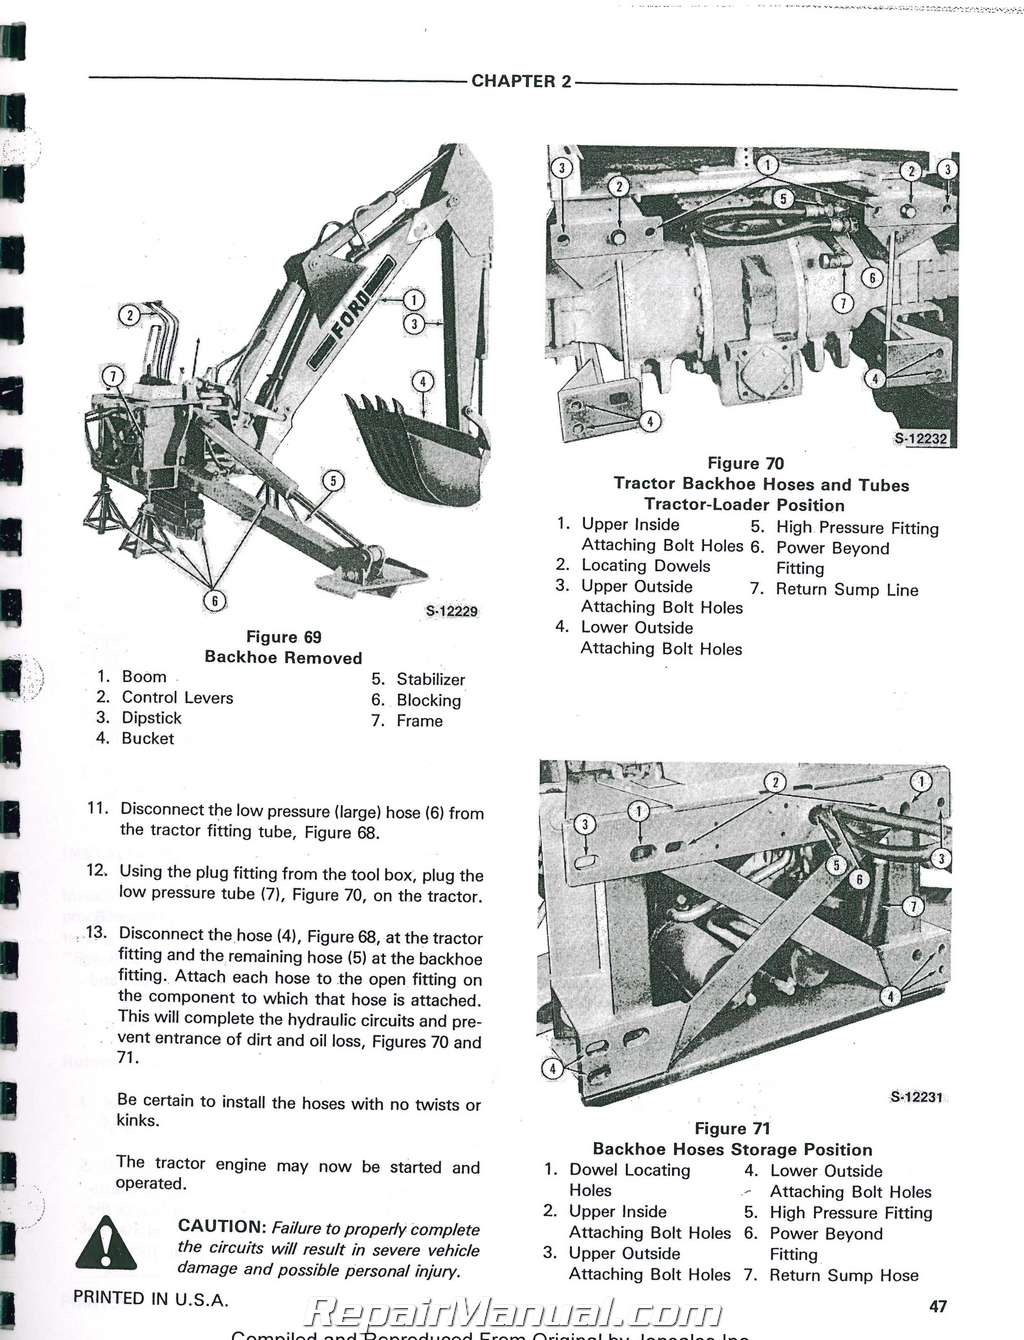 Ford 555A 555B 655A Tractor Loader Backhoe Printed Service Manual  Ford 555b Wiring Diagram Site Www.tractorbynet.com    RepairManual.com